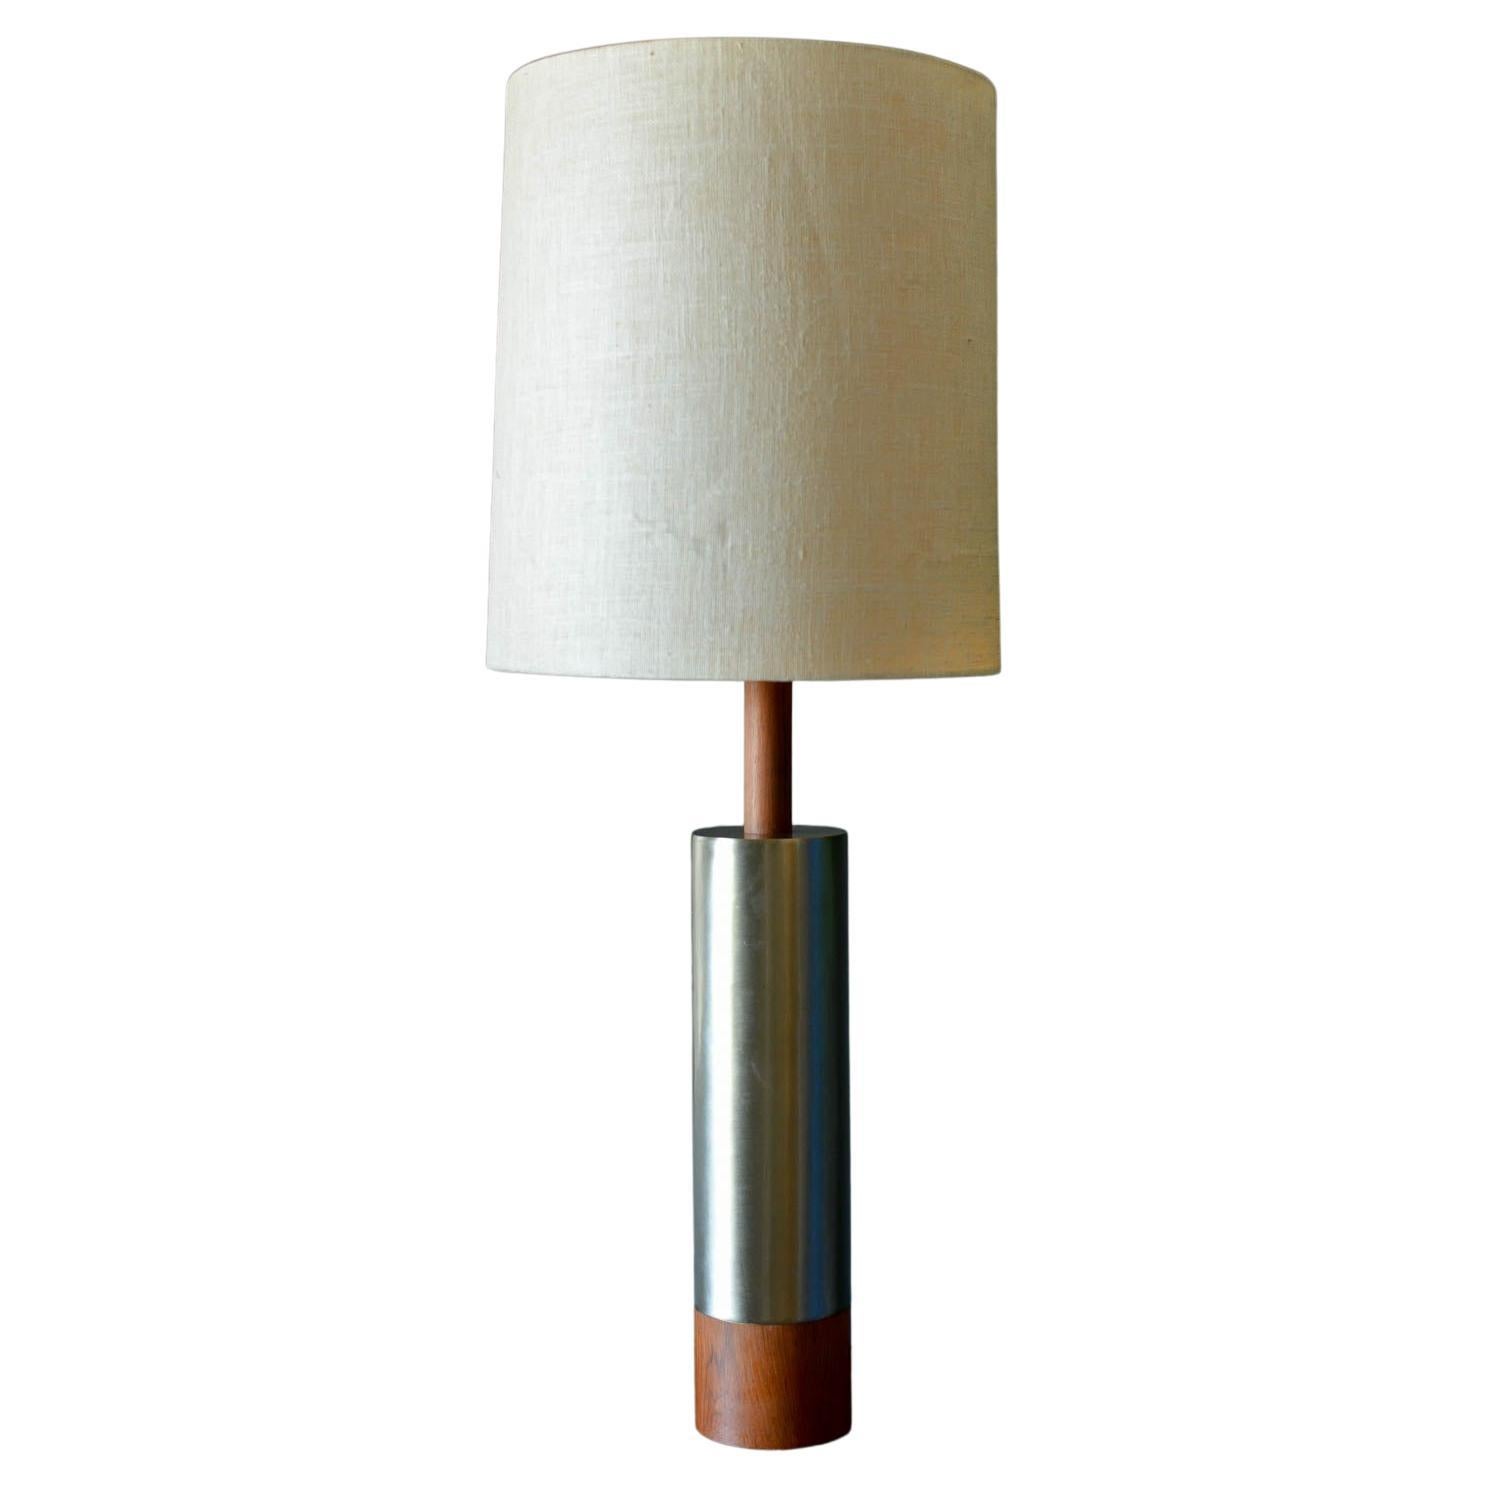 Rosewood and Brushed Aluminium Cylinder Table Lamp by Laurel, circa 1970 For Sale